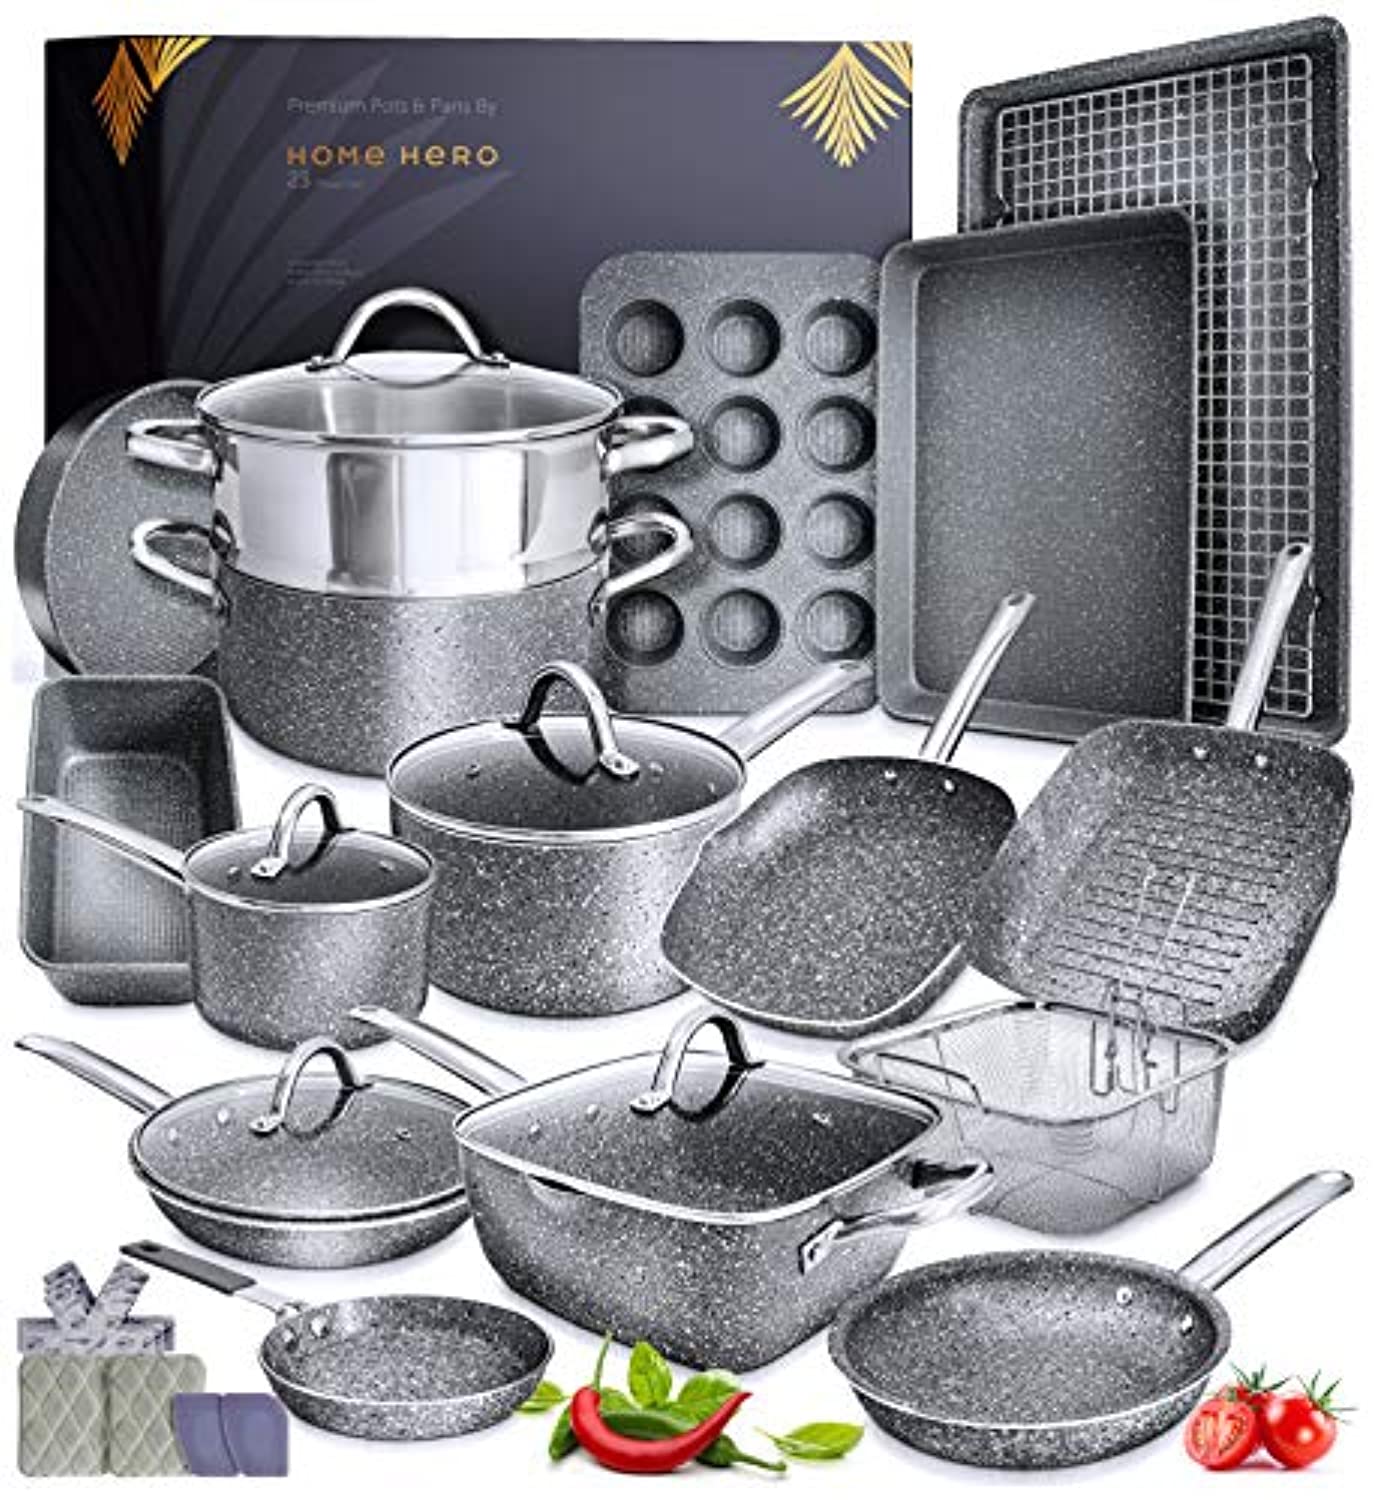 Dropship Nonstick Cookware Sets, 9 Pcs Granite Non Stick Pots And Pans Set  With Removable Handle to Sell Online at a Lower Price